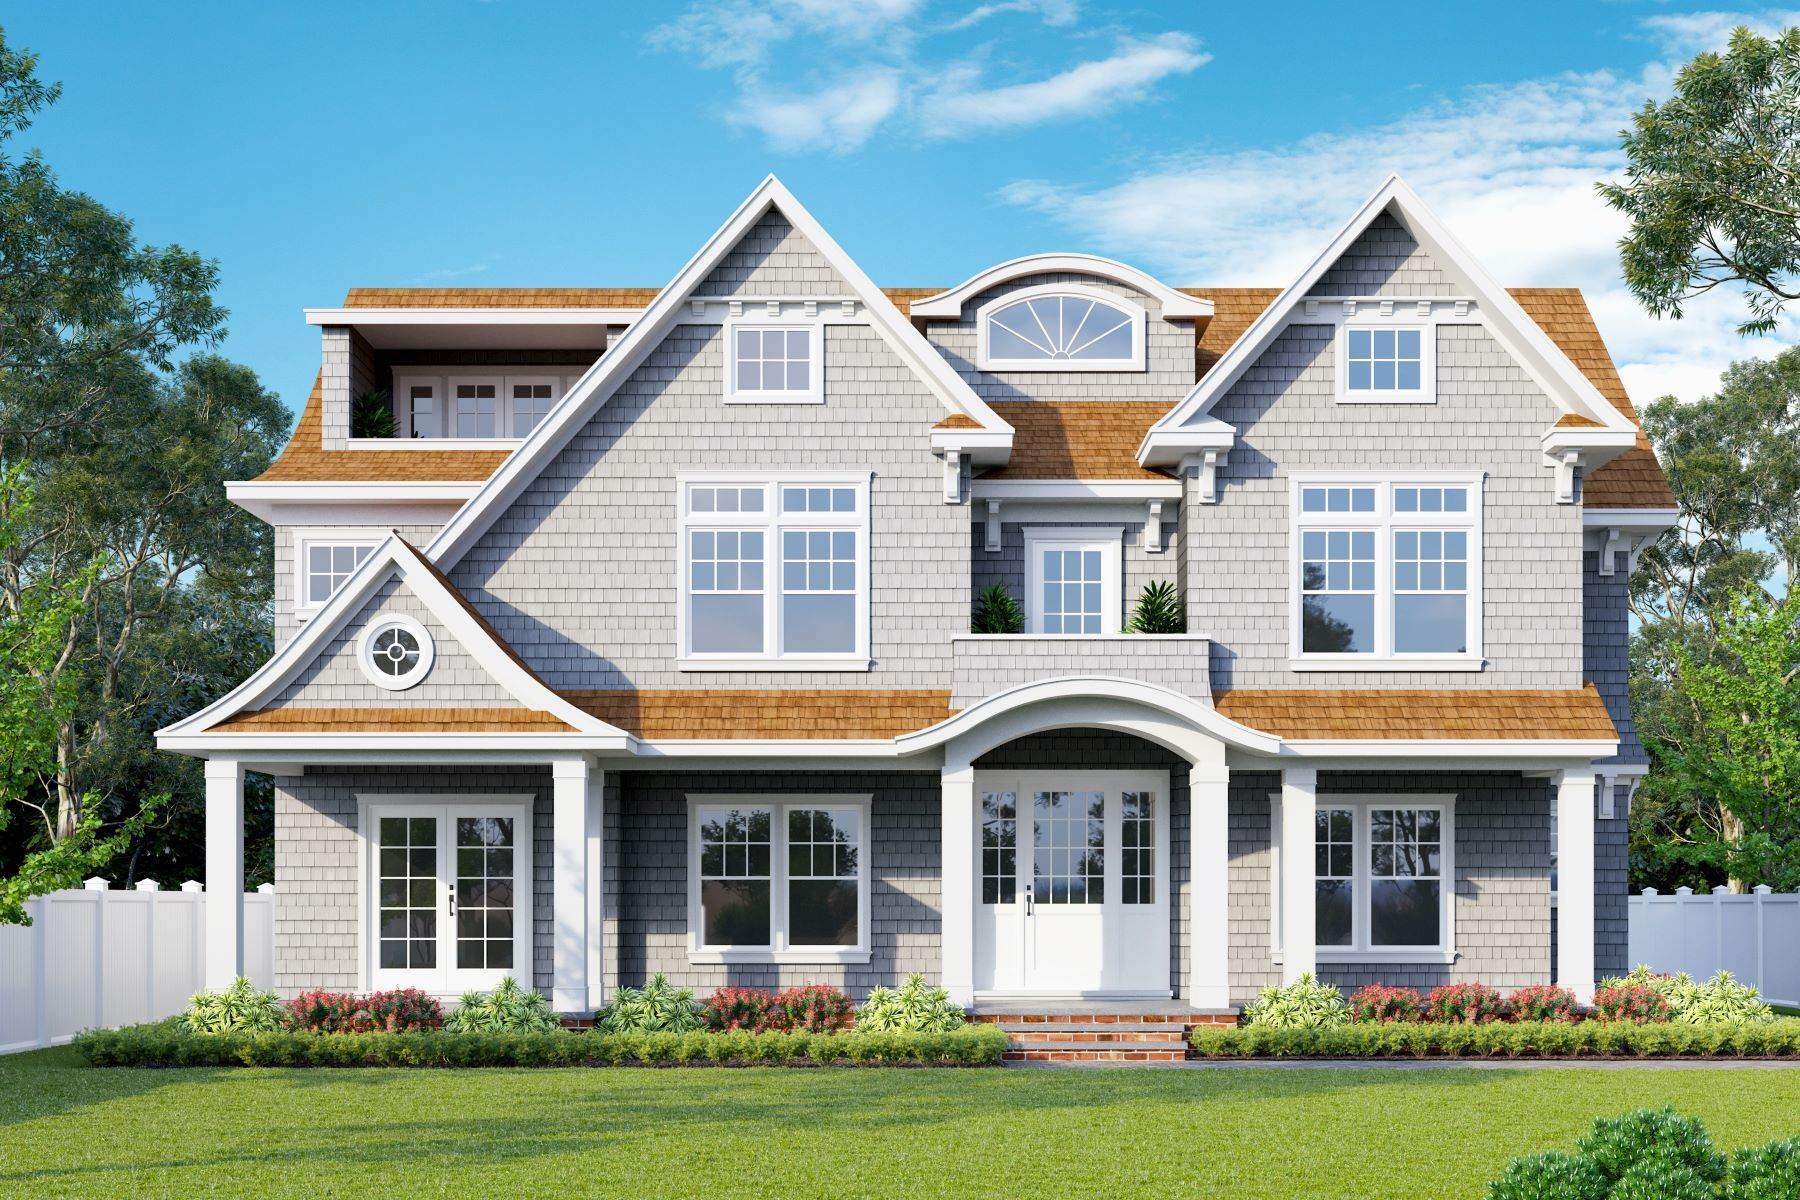 Property for Sale at Impressive New Construction 218 Brooklyn Boulevard Sea Girt, New Jersey 08750 United States